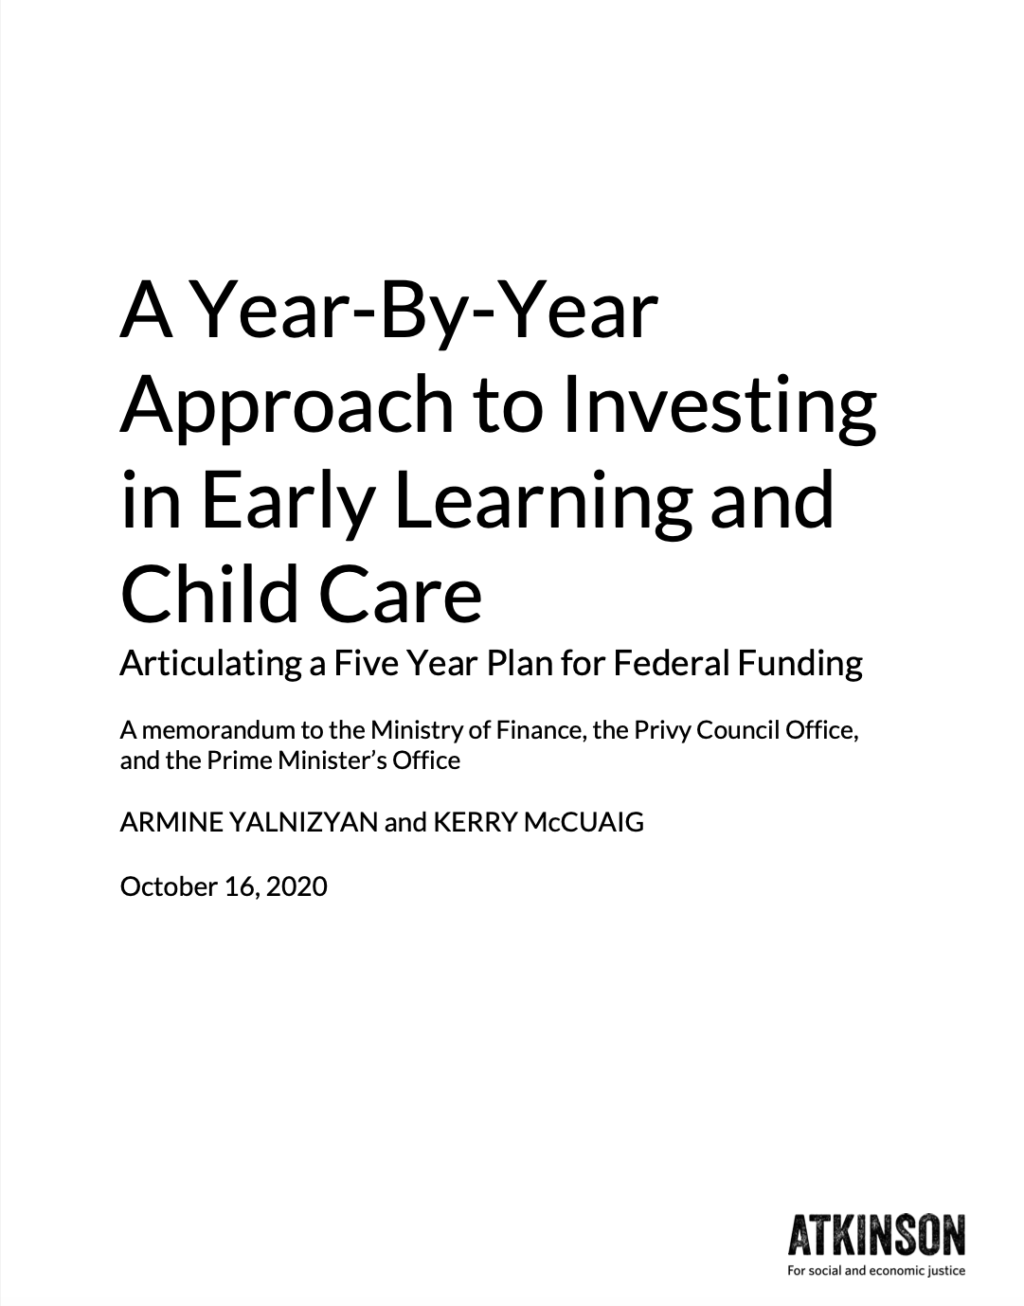 Cover Image: A Year-By-Year Approach to Investing in Early Learning and Child Care
